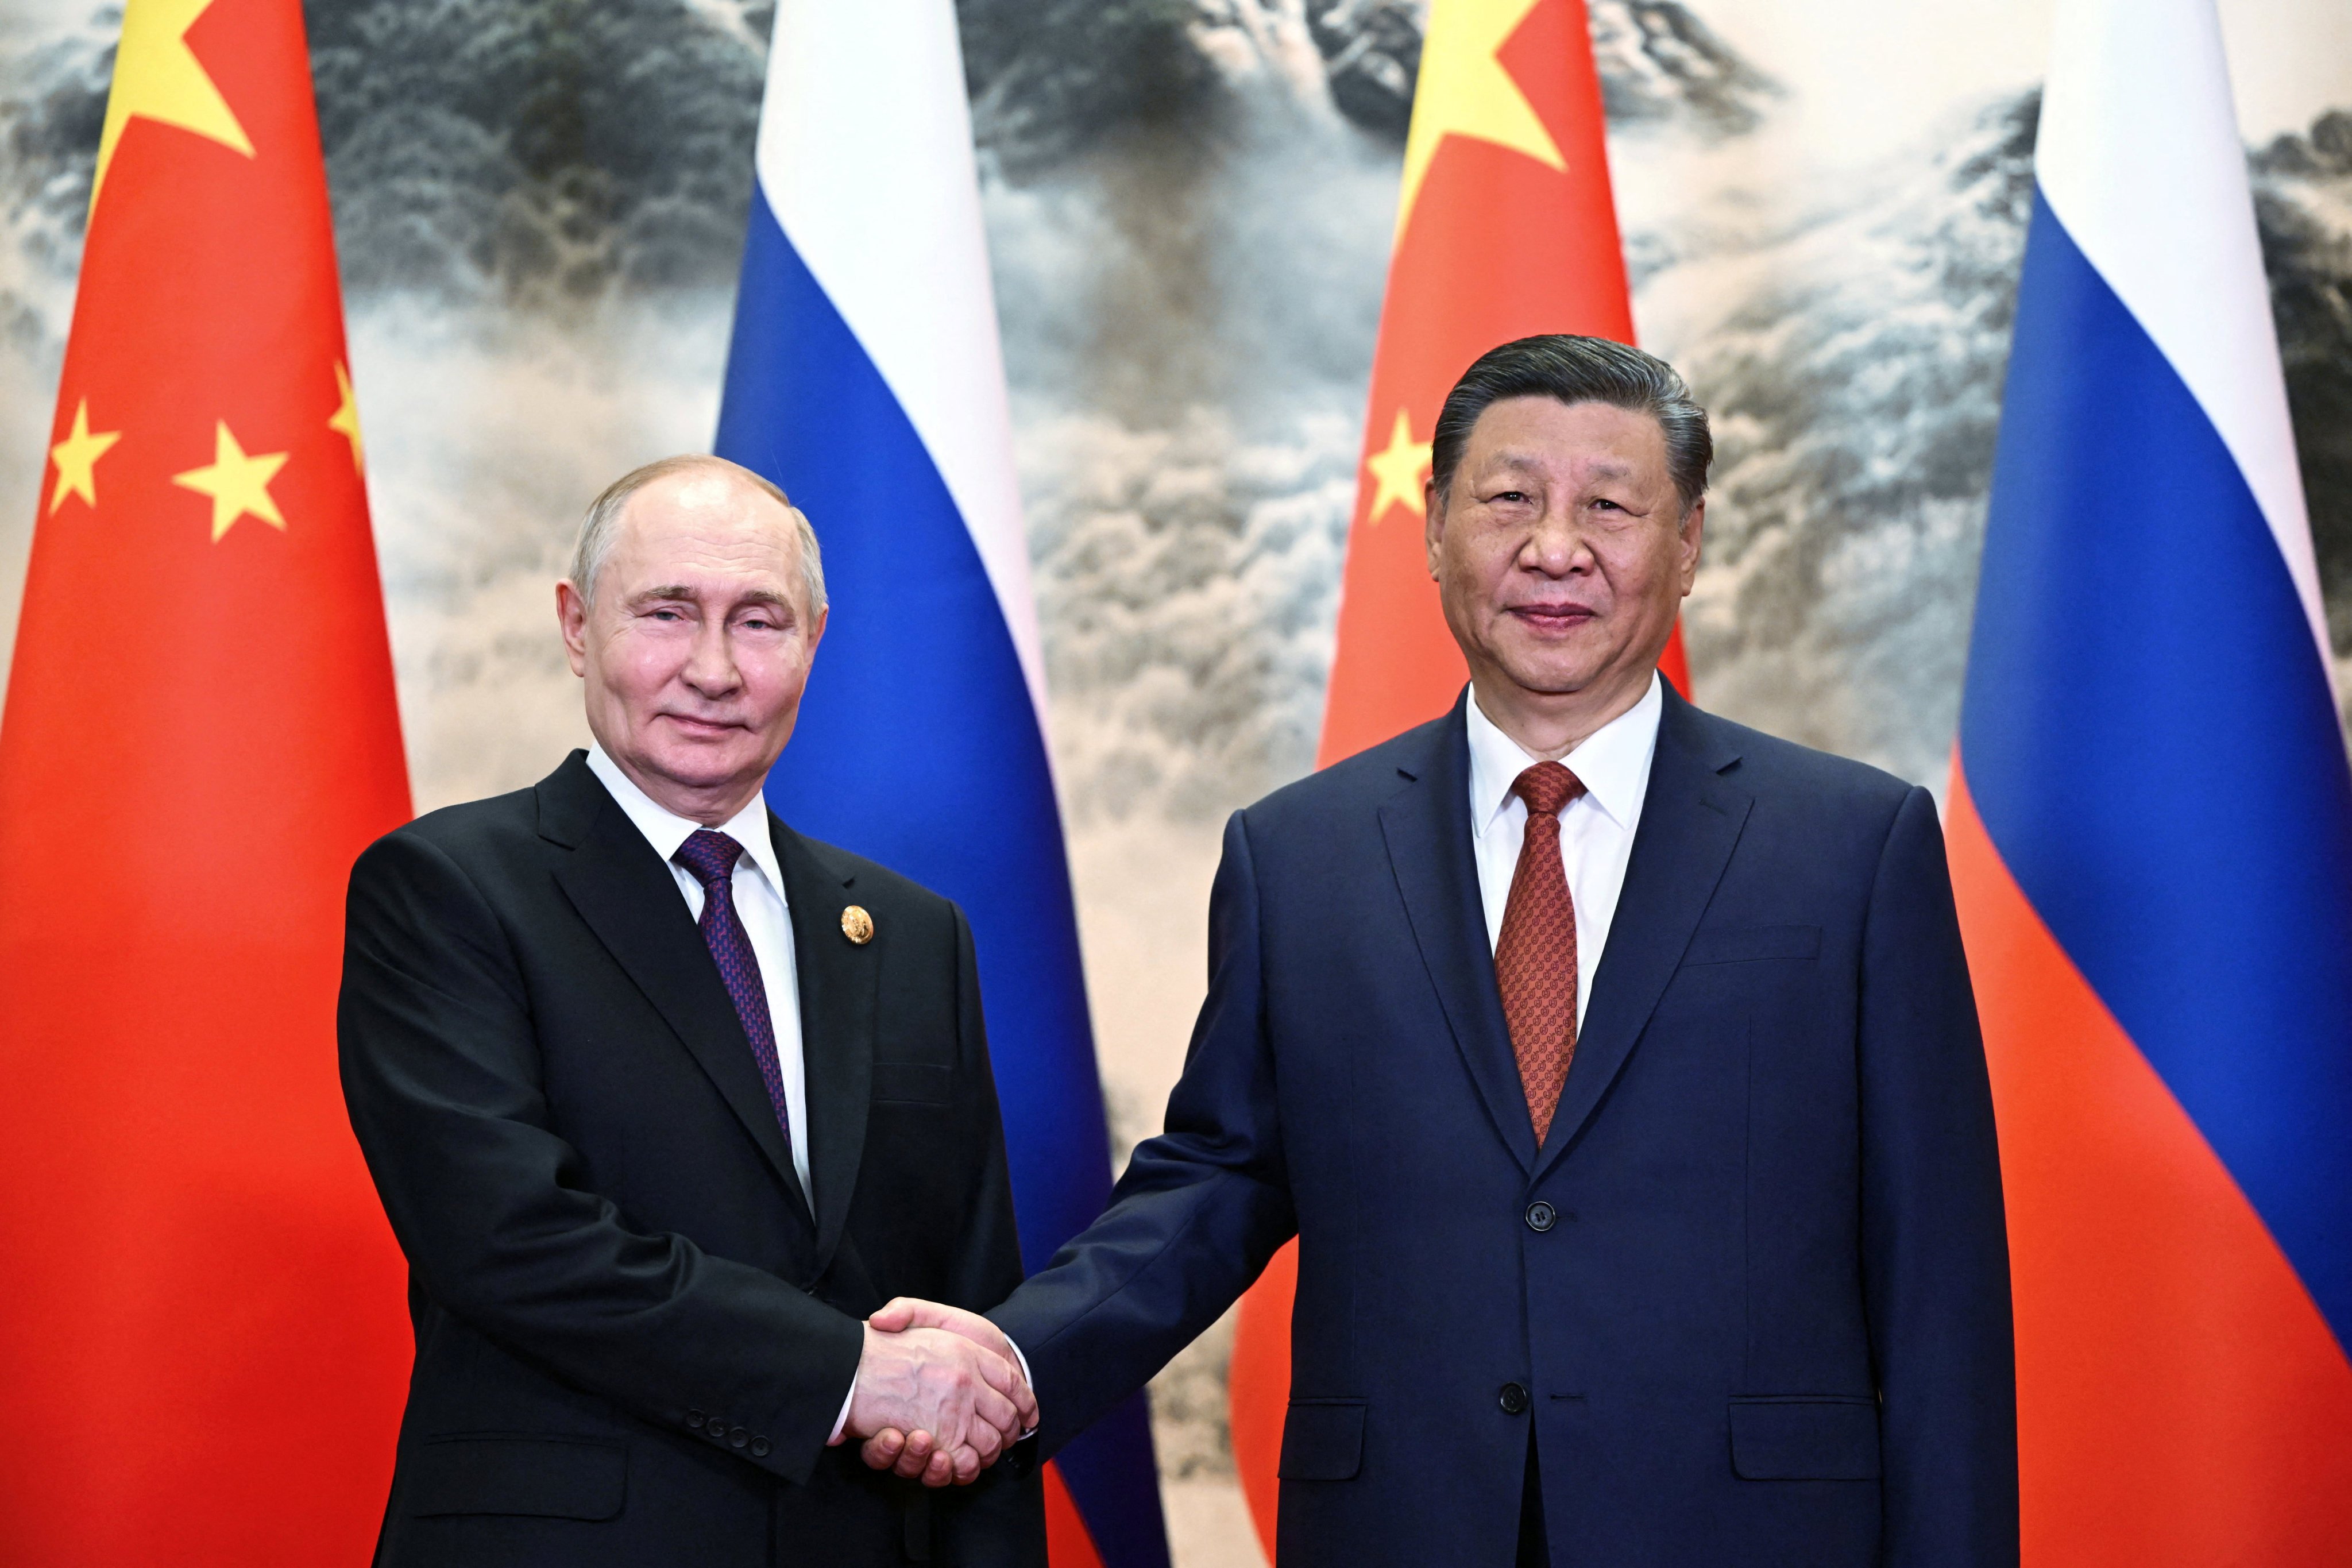 Russian President Vladimir Putin and Chinese President Xi Jinping at a signing ceremony at the Great Hall of the People in Beijing on Thursday. Photo: Sputnik via Reuters